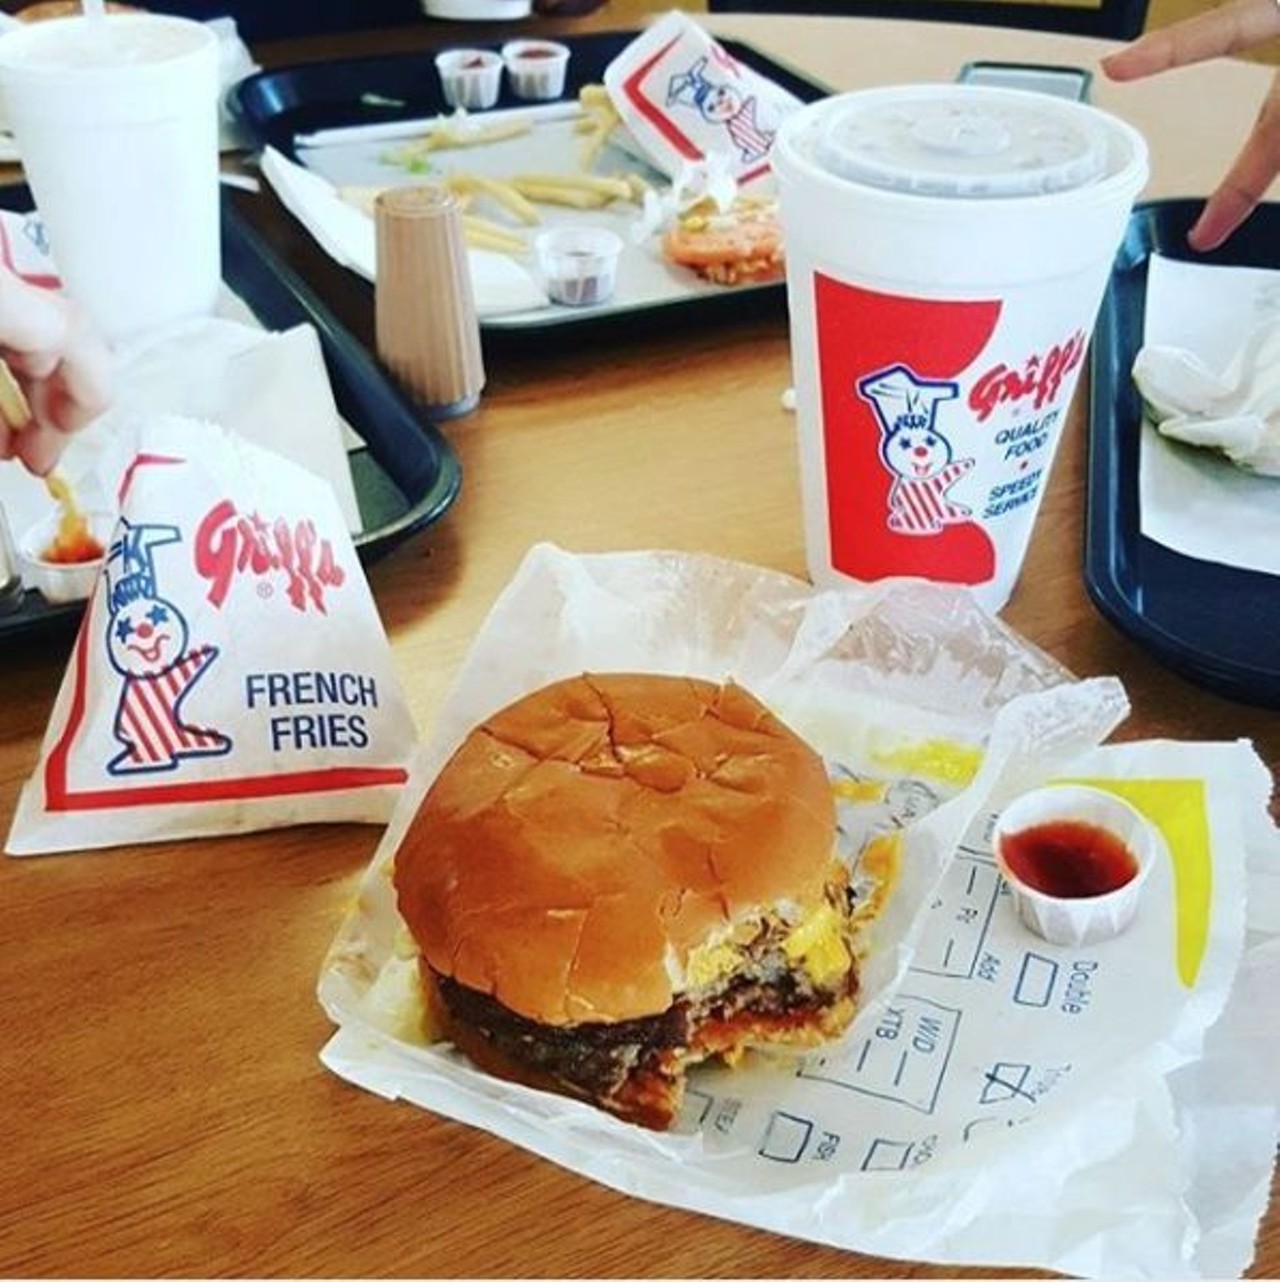 Griff&#146;s Hamburgers
218 Pleasanton Road, (210) 923-1671
Because you can get big burger flavors on a wee little budget. 
Photo via Instagram, 0skitty